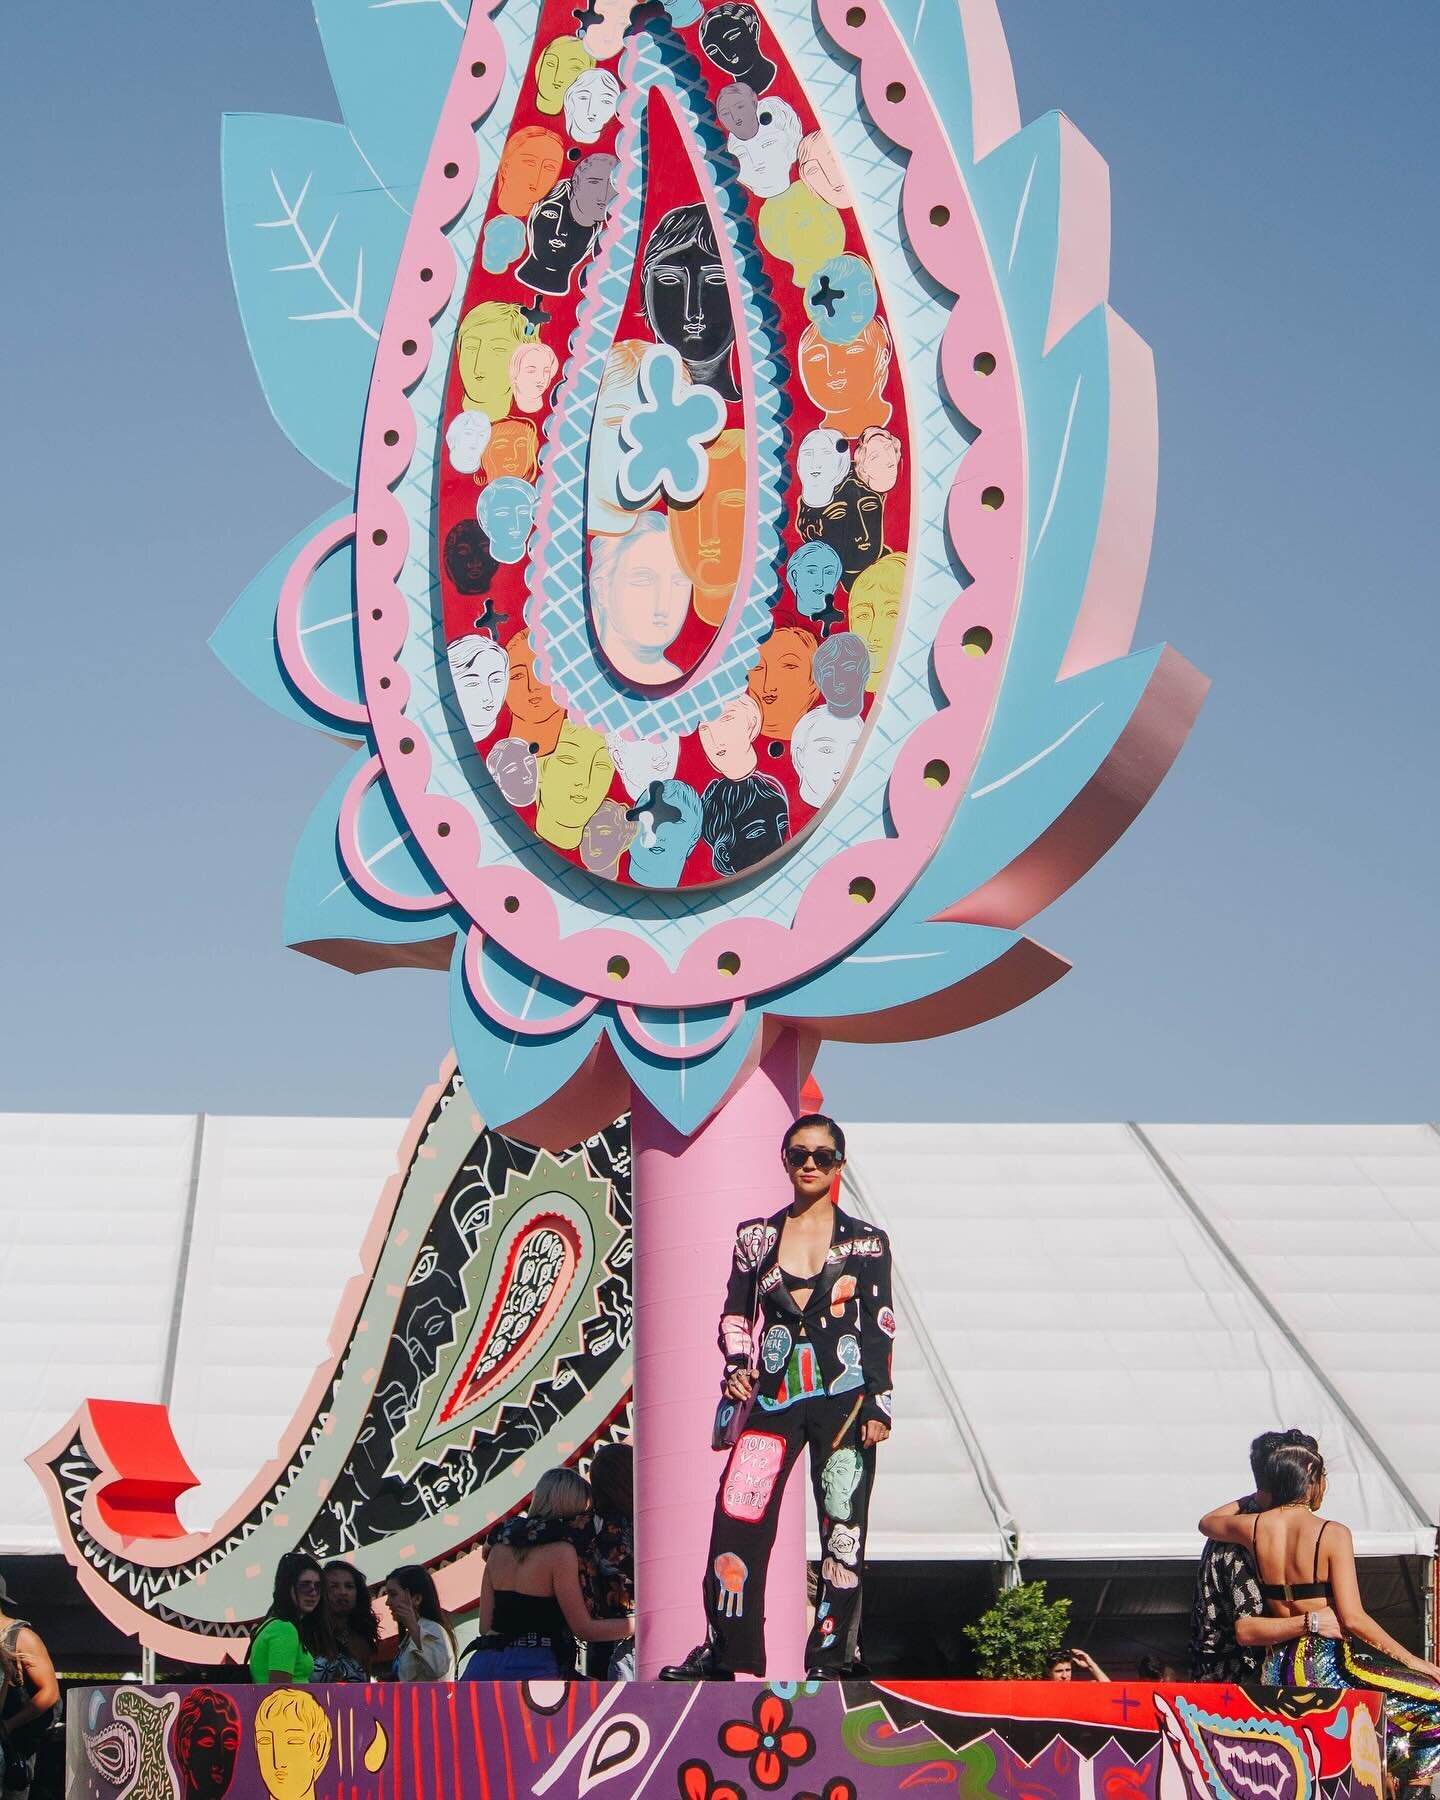 It&rsquo;s almost festival season! 🎉🎉🎉
Check out my permanent installation MISMO at @stagecoach this year!

Photo by @georgeduchannes from the first installation of MISMO in &lsquo;19.

Side note: Make sure to put in your custom MUCHO order for yo